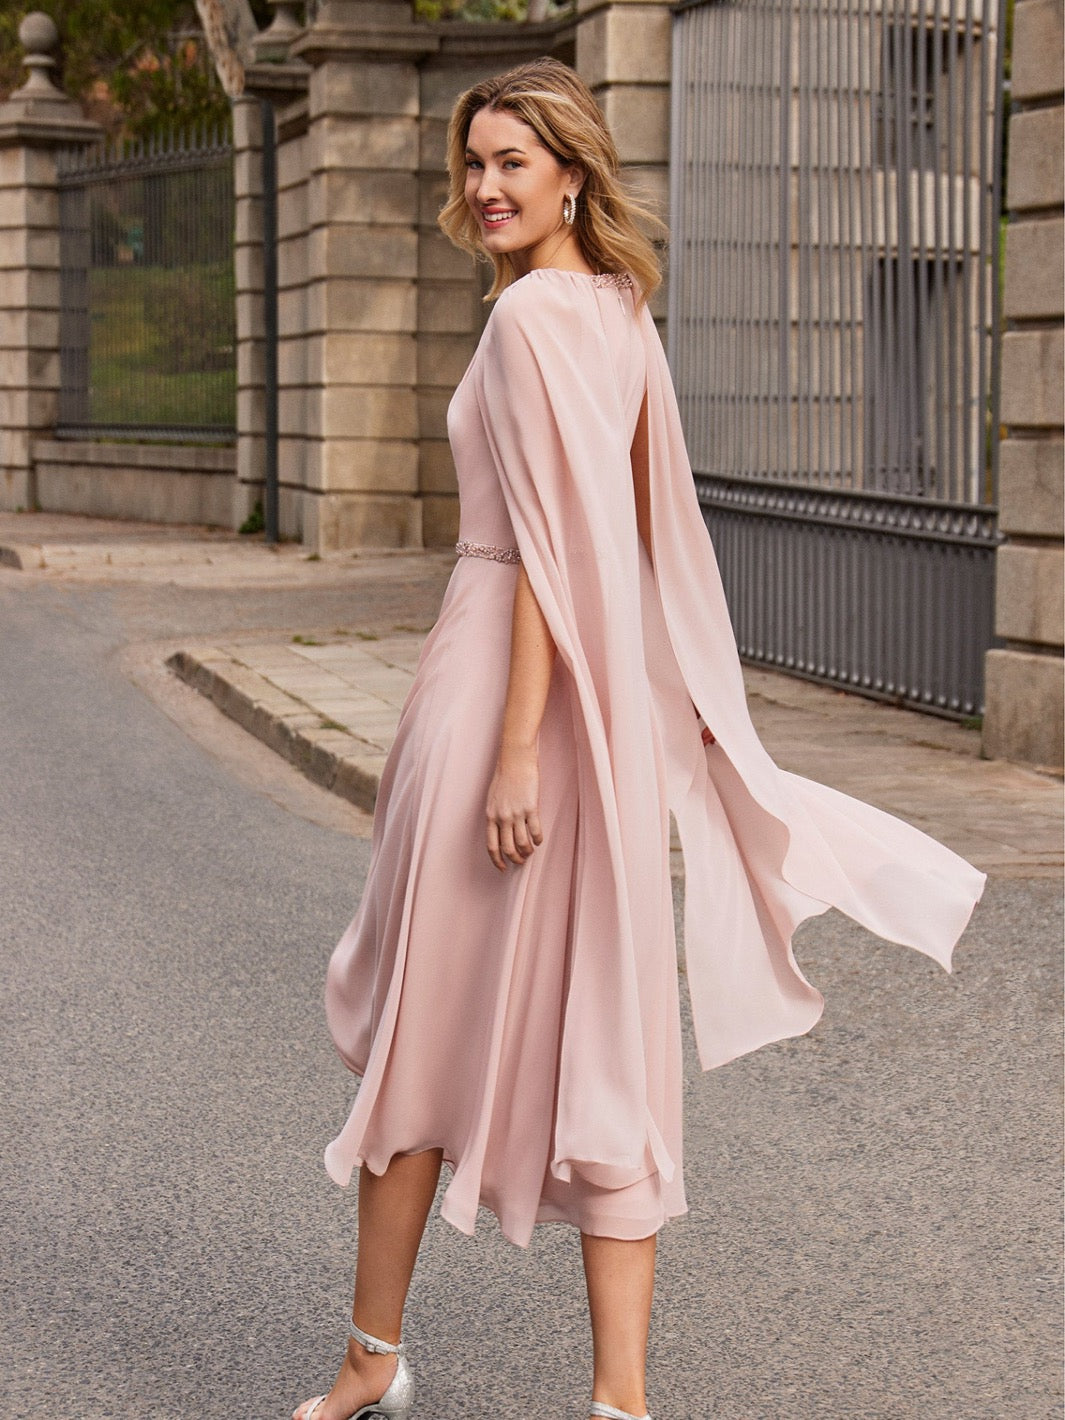 Mother Of Bride Dresses & Outfits Online | Nicola Ross Kildare Ireland